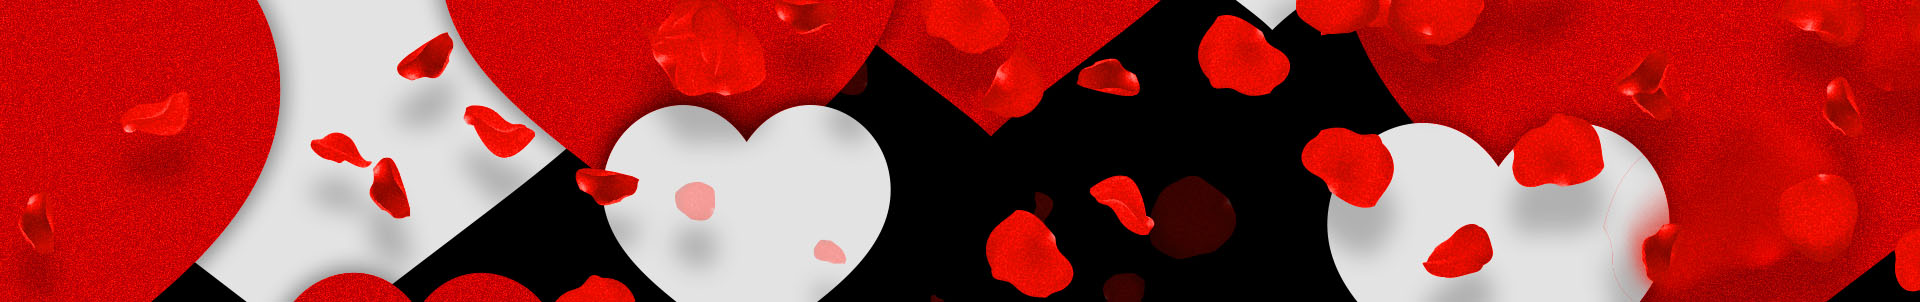 Spinnin' launches Valentine's playlist tool